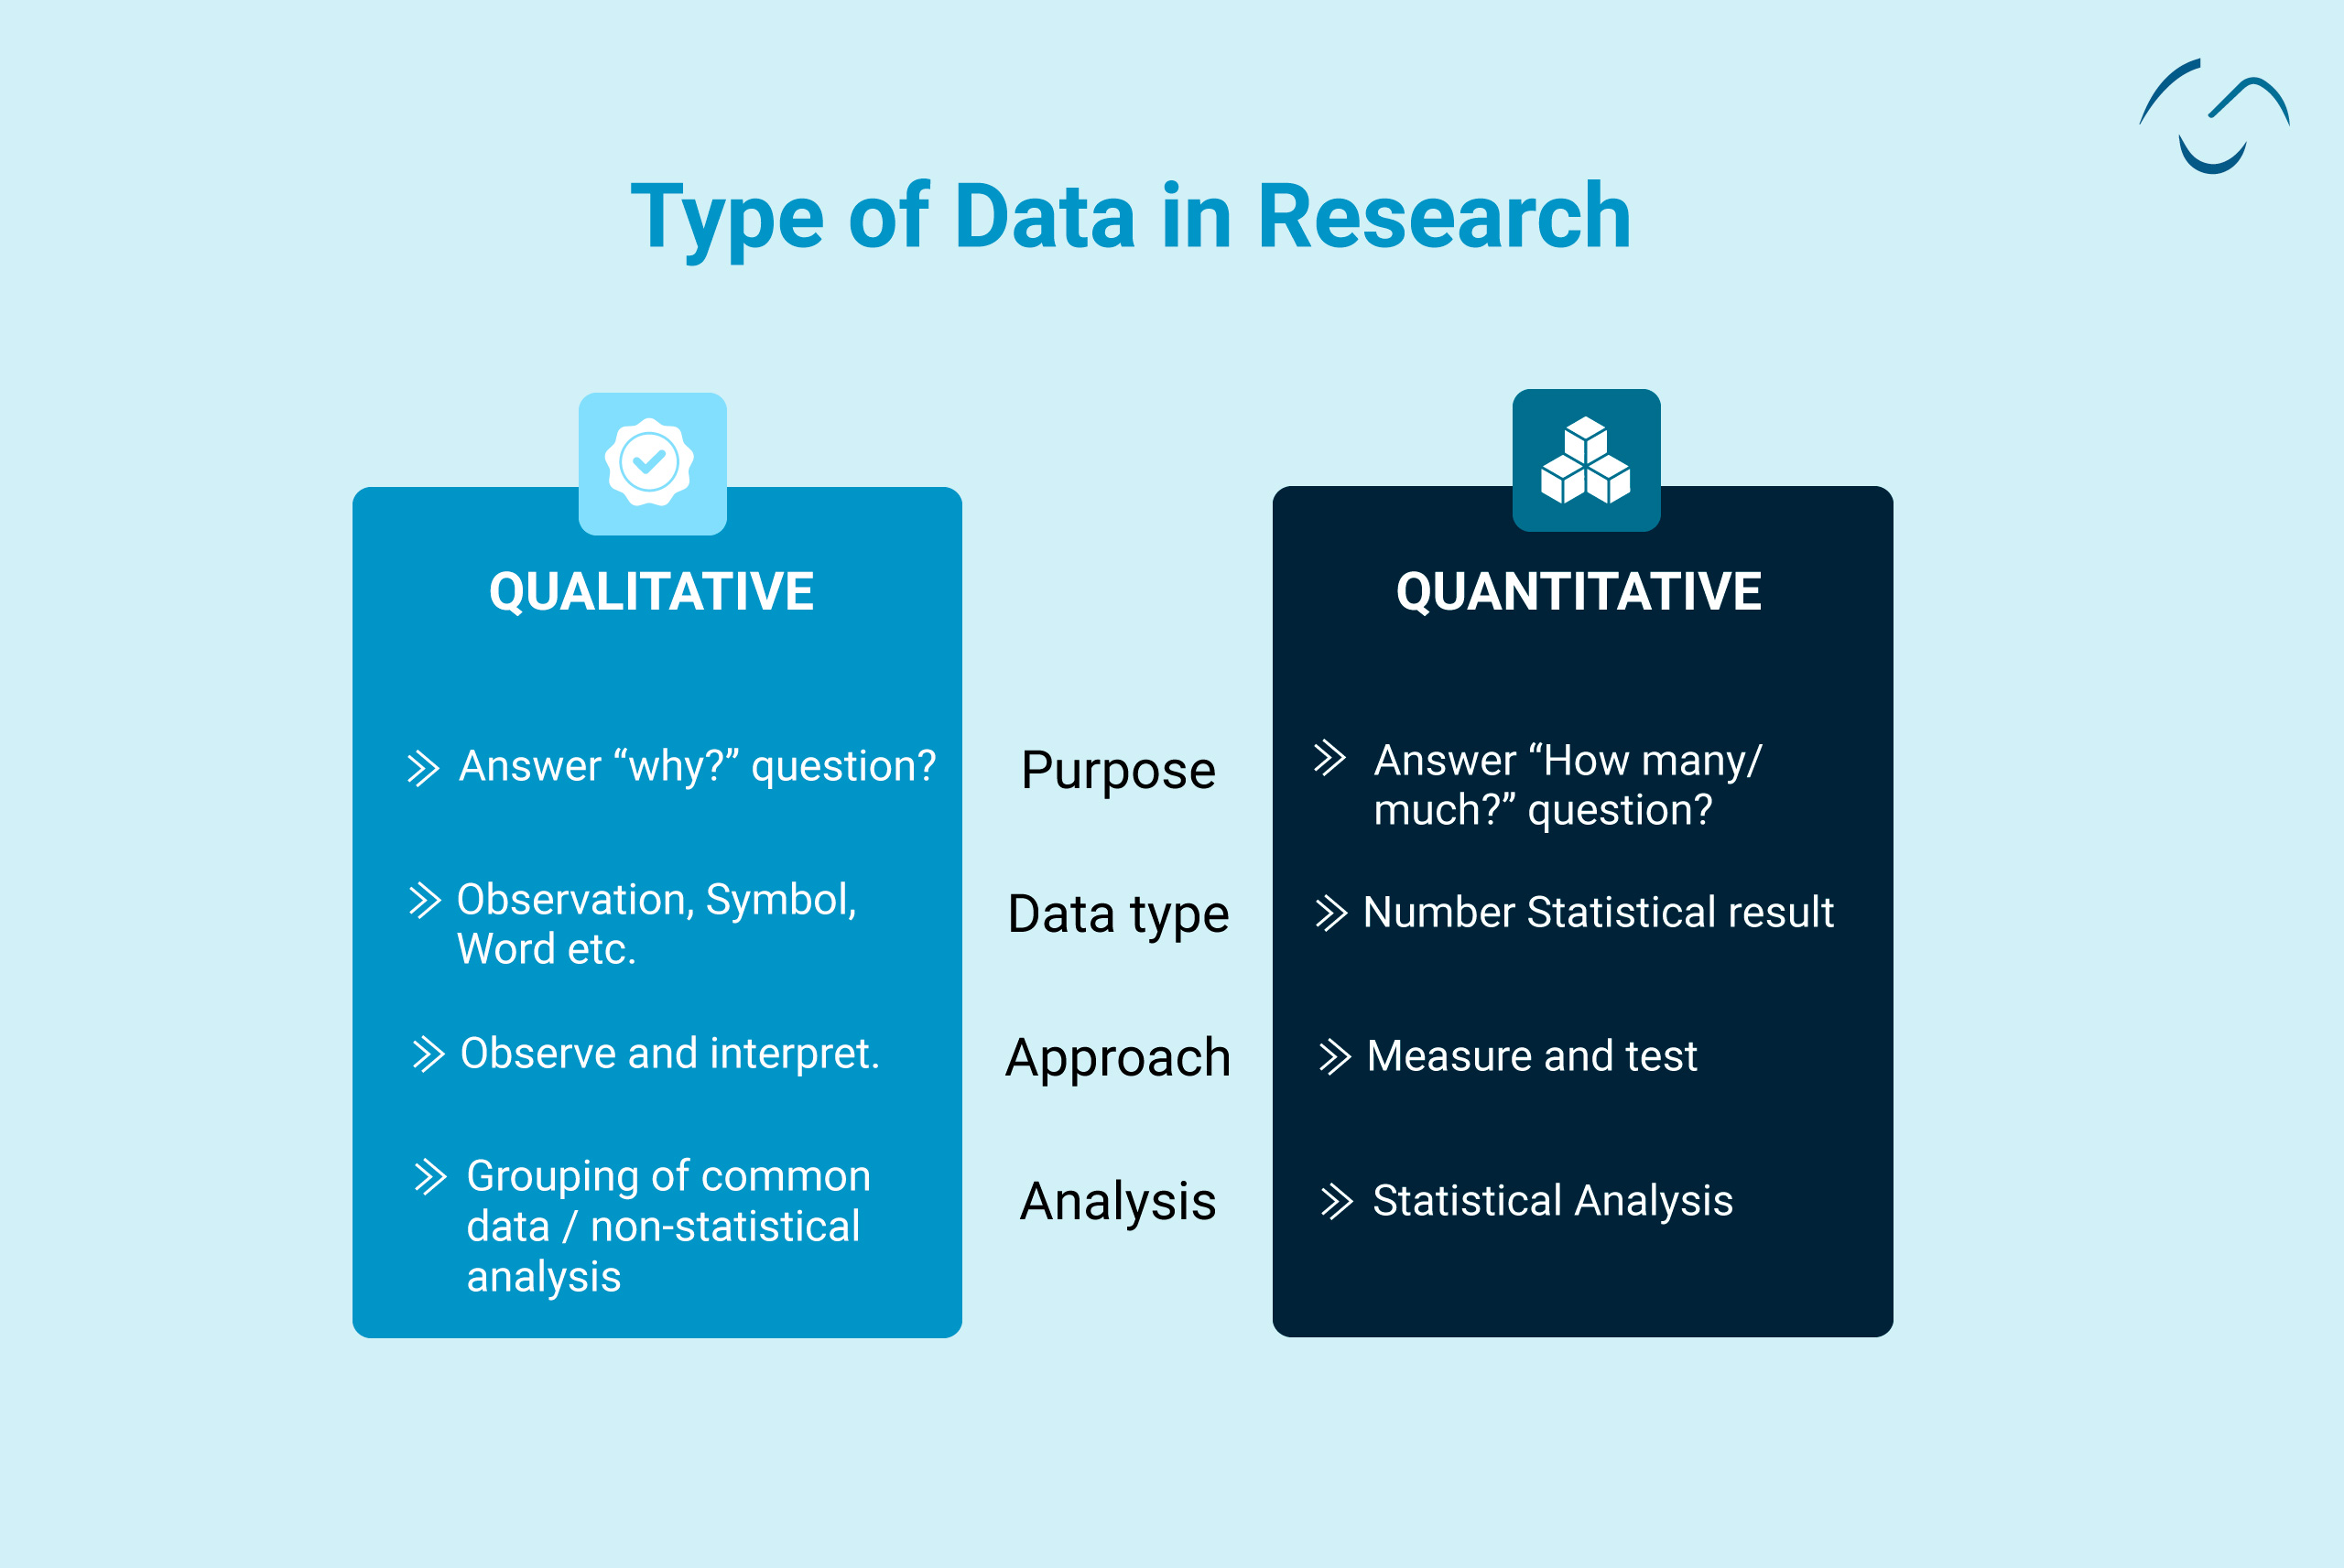 Type of Data in Research